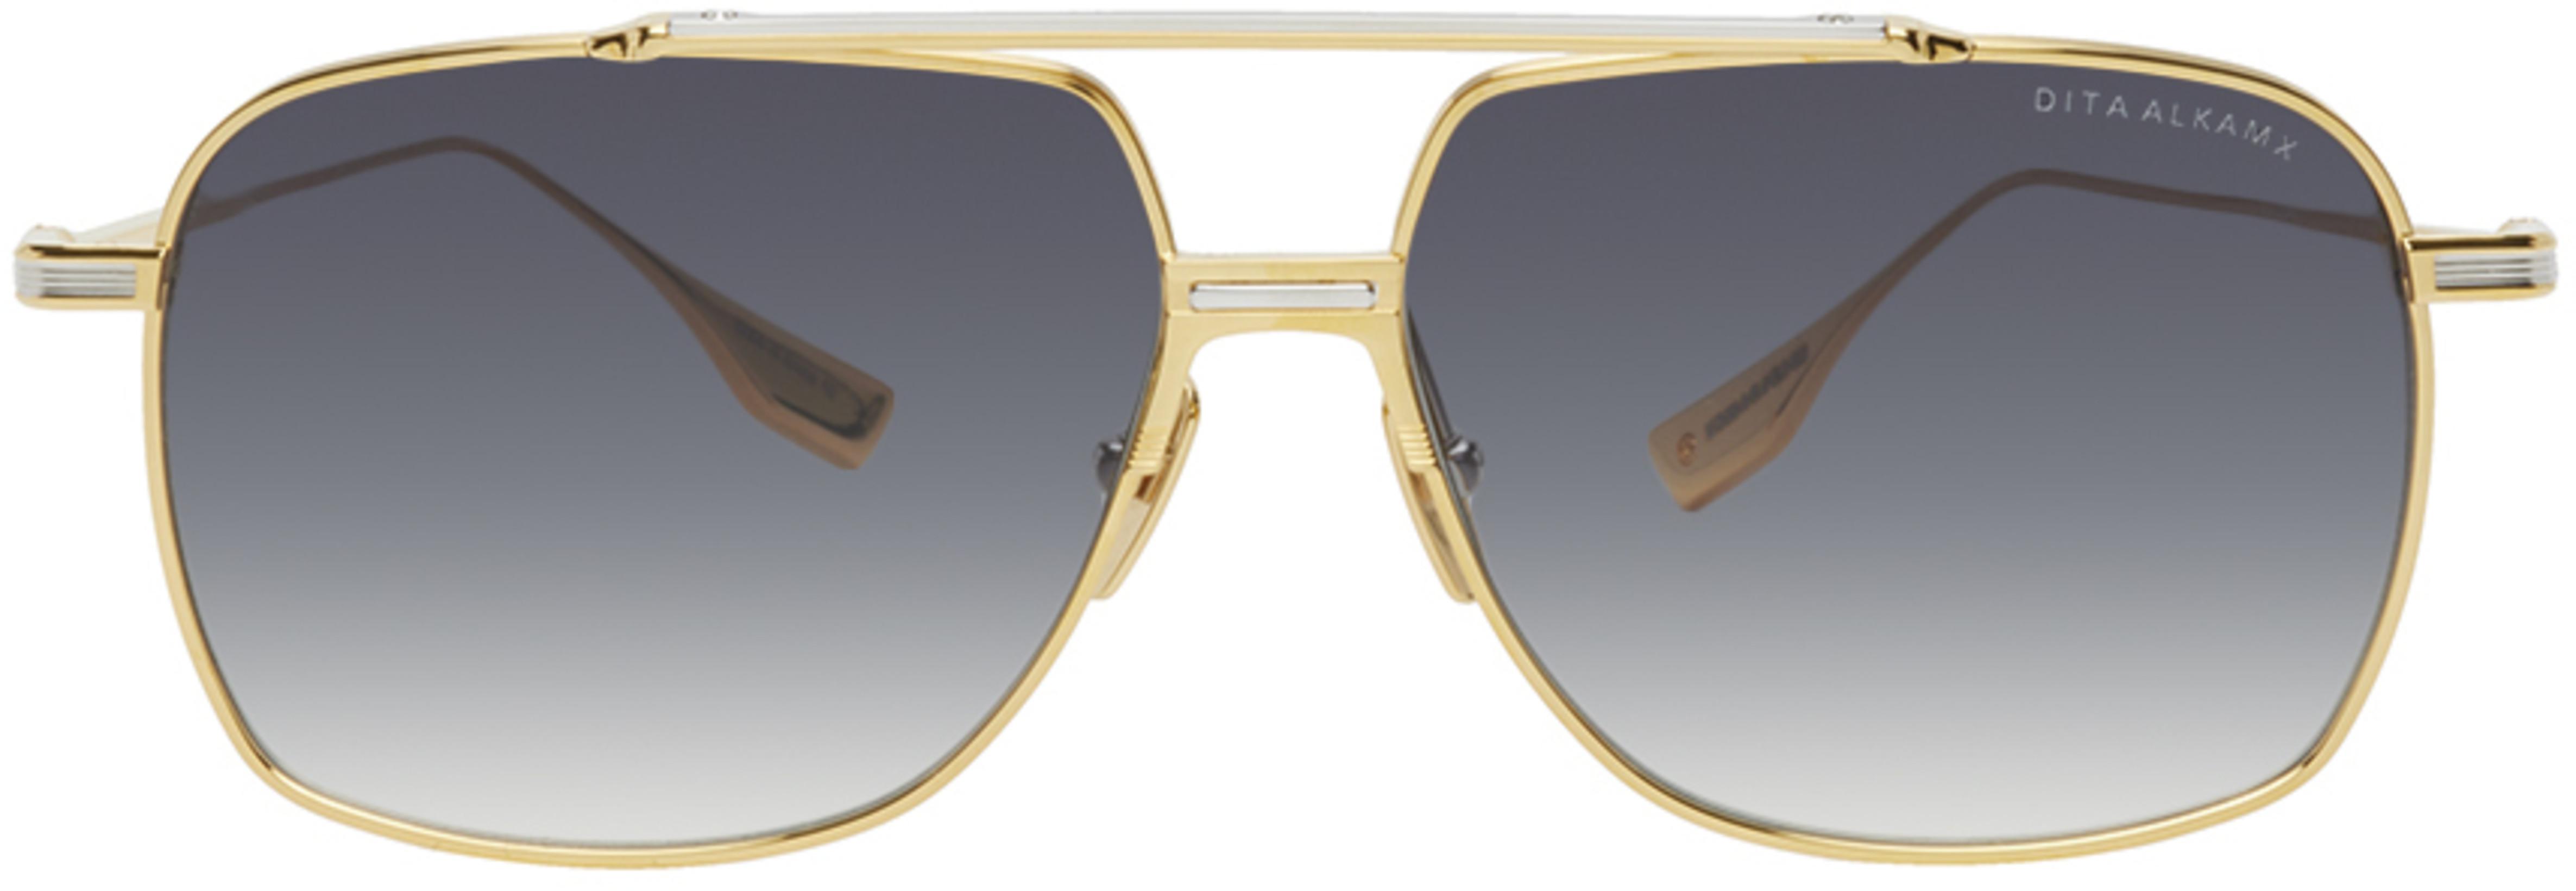 Gold & Silver Alkamx Sunglasses by DITA